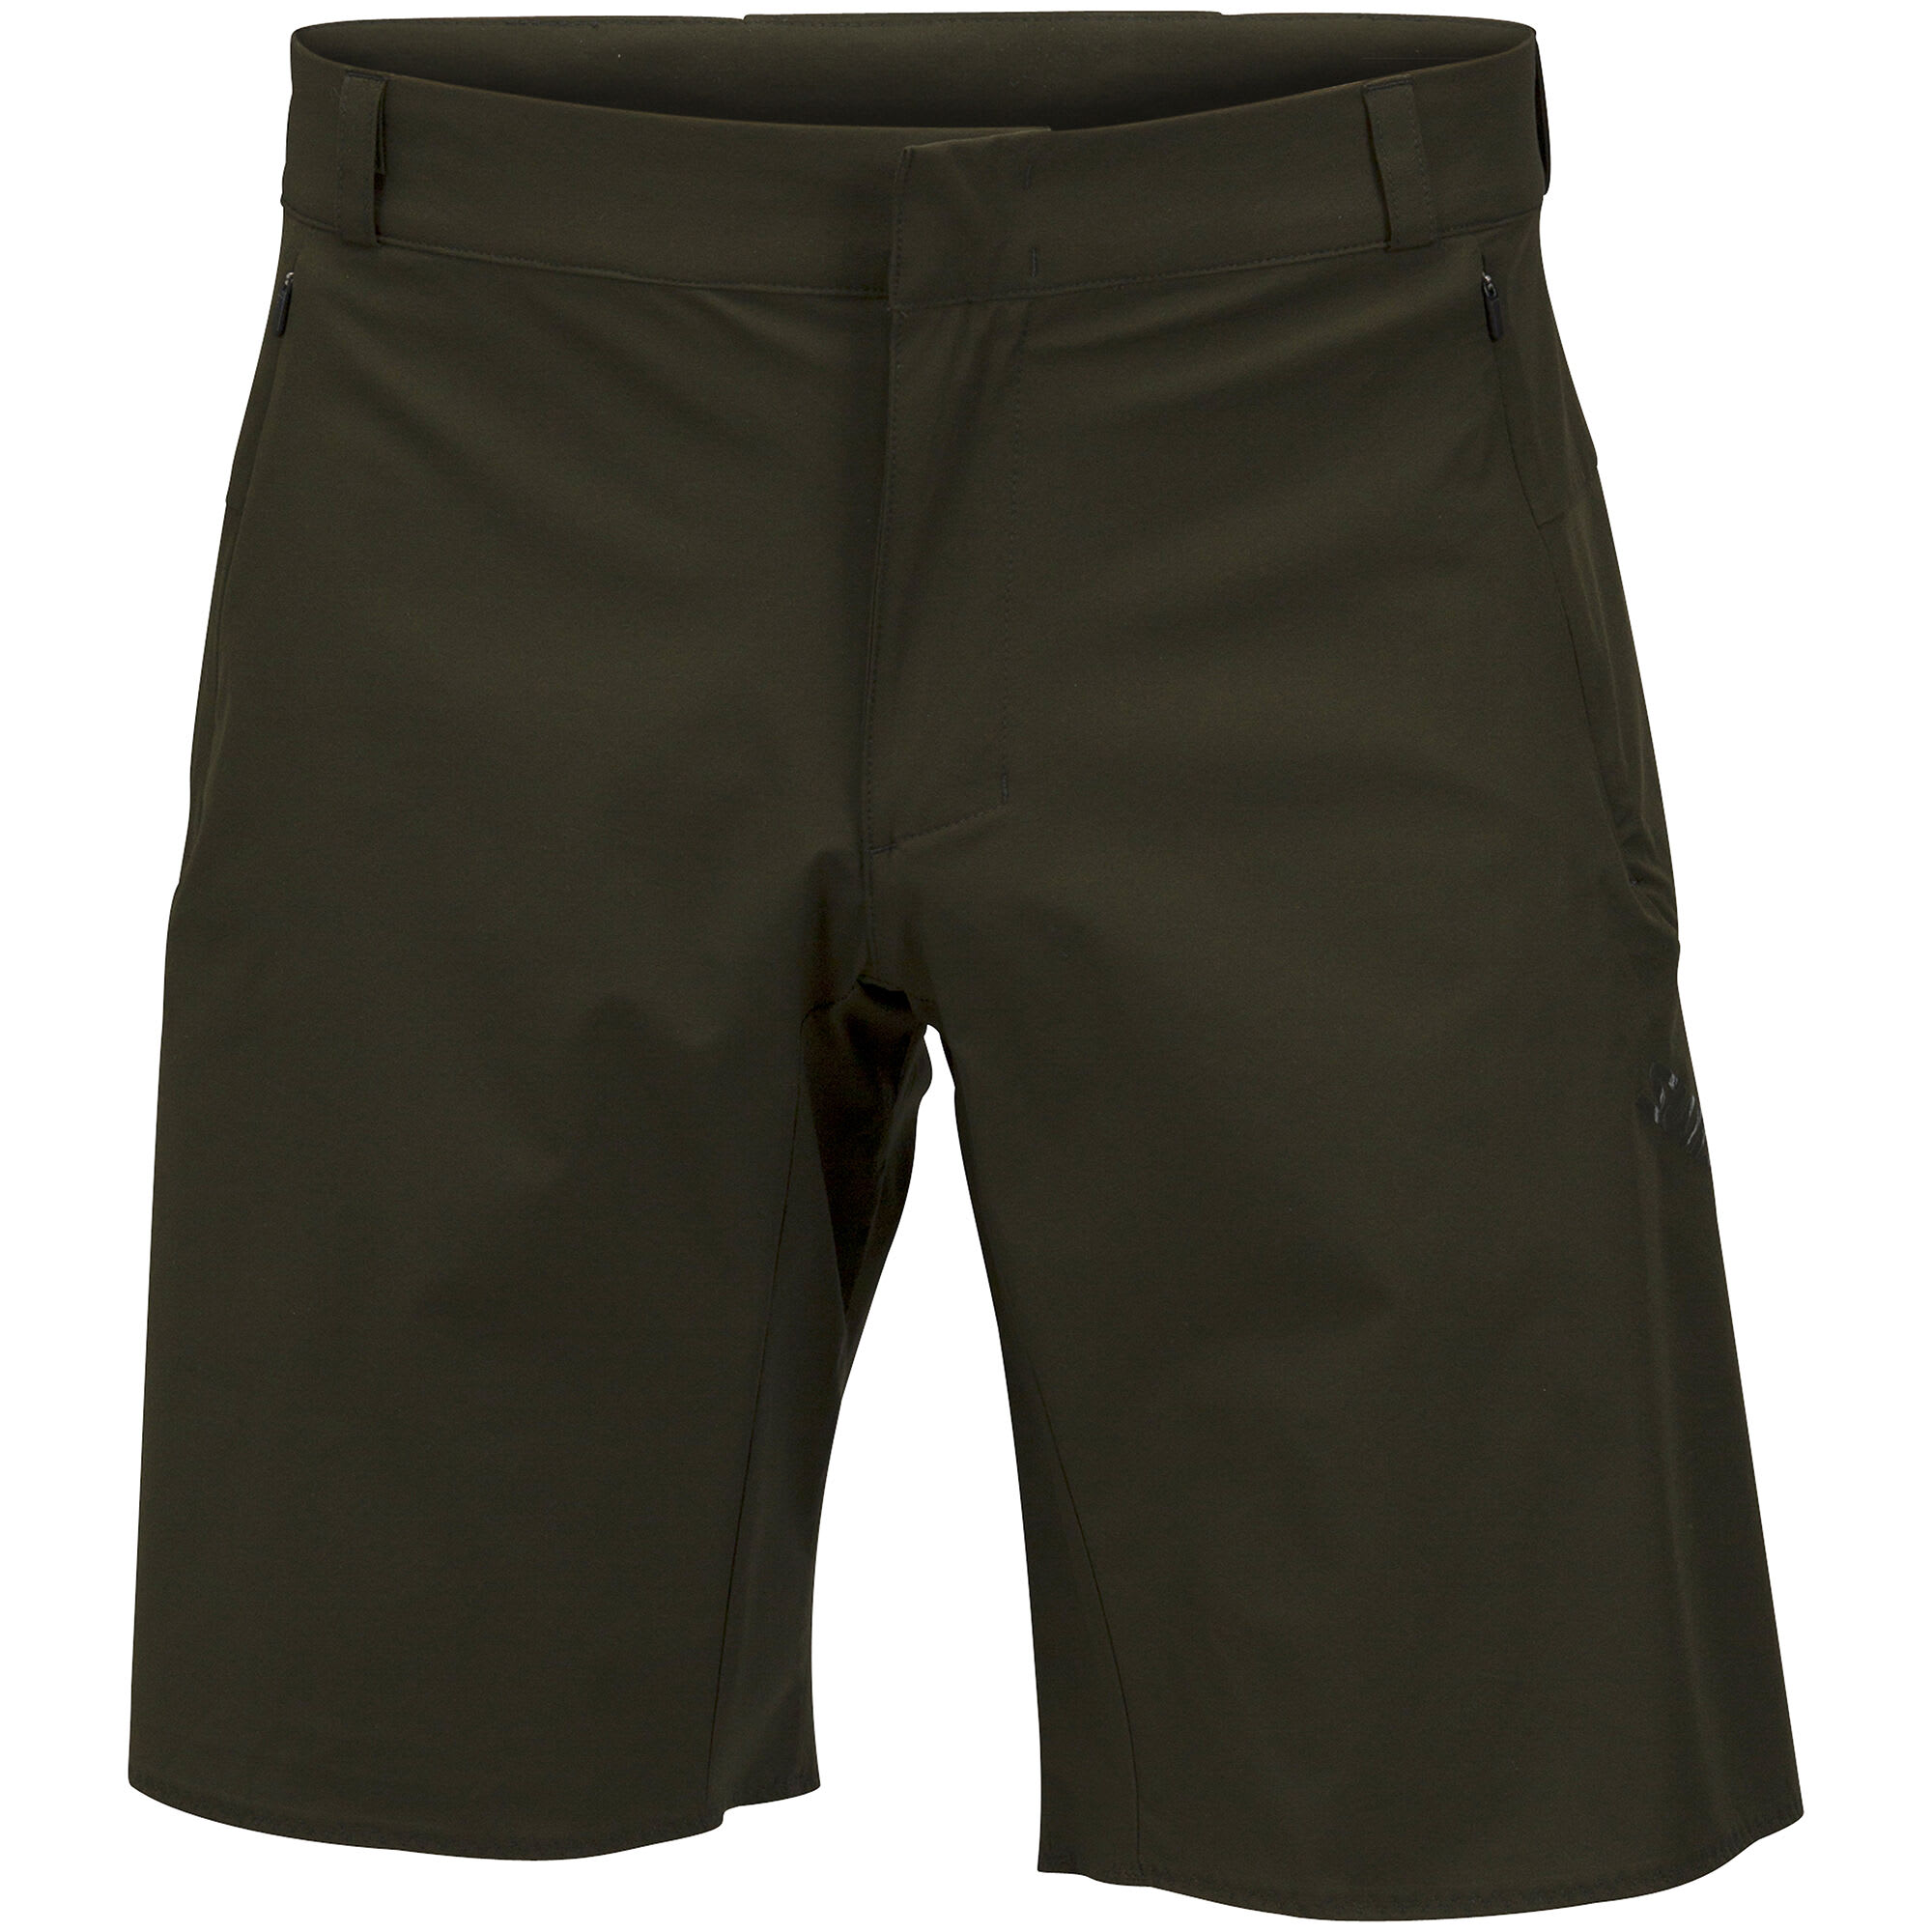 Buy Swix Men's Motion Adventure Shorts from Outnorth